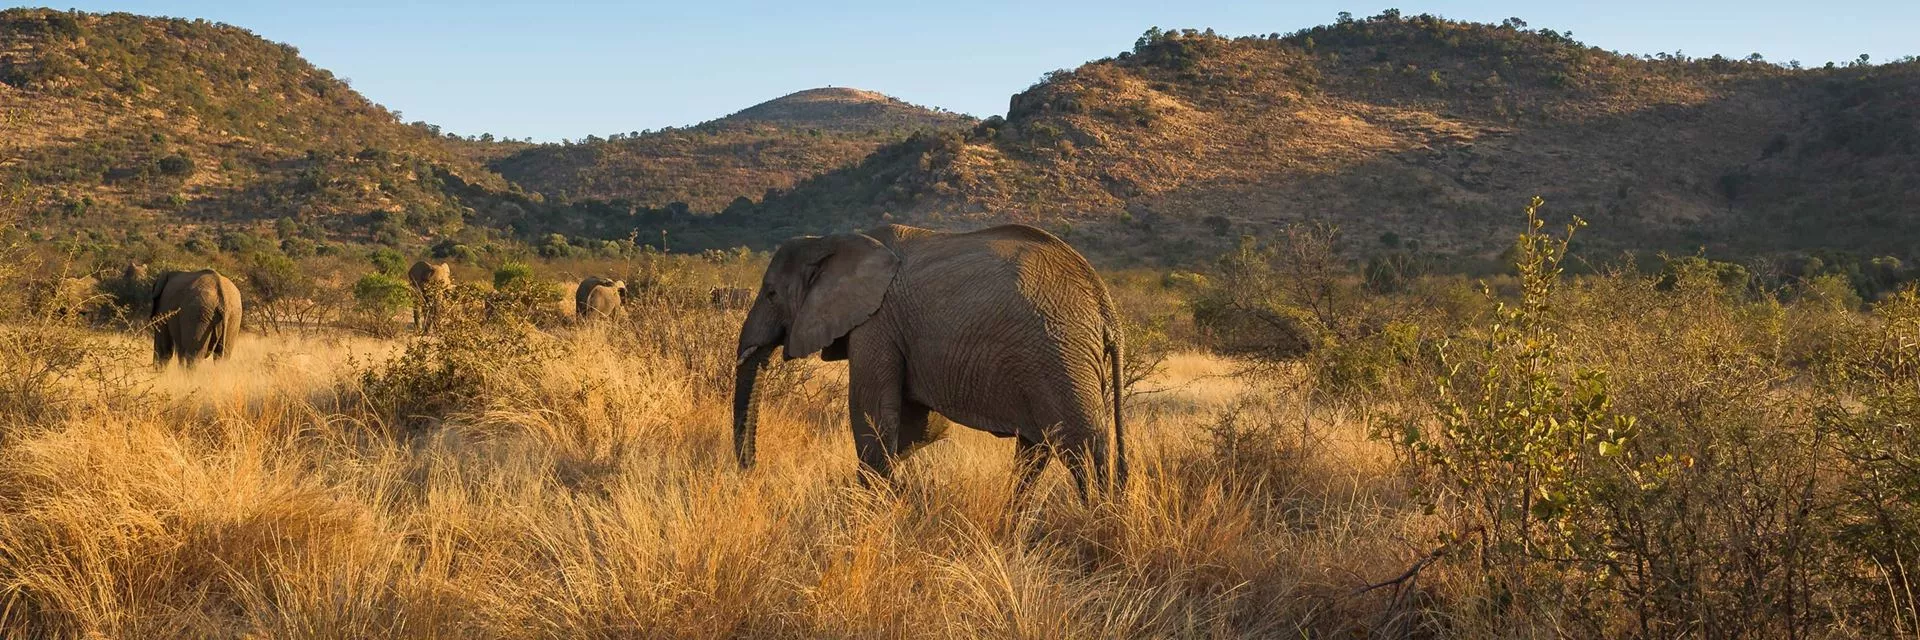 Pilanesberg National Park in South Africa, Africa | Parks,Safari - Rated 5.1